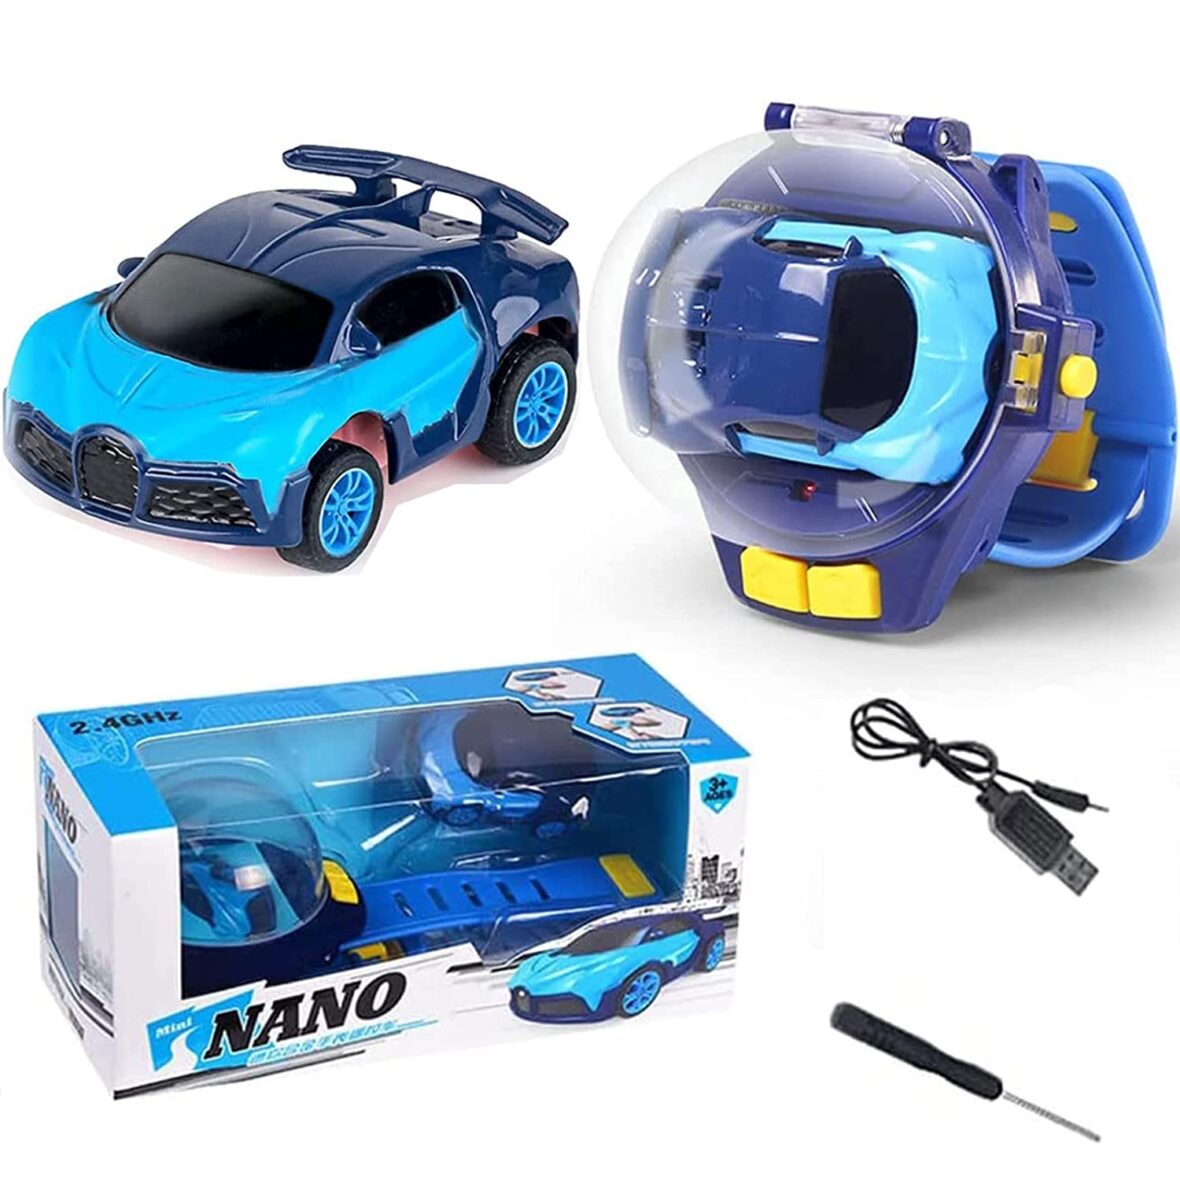 Mini RC Car Watch Toy with Lights